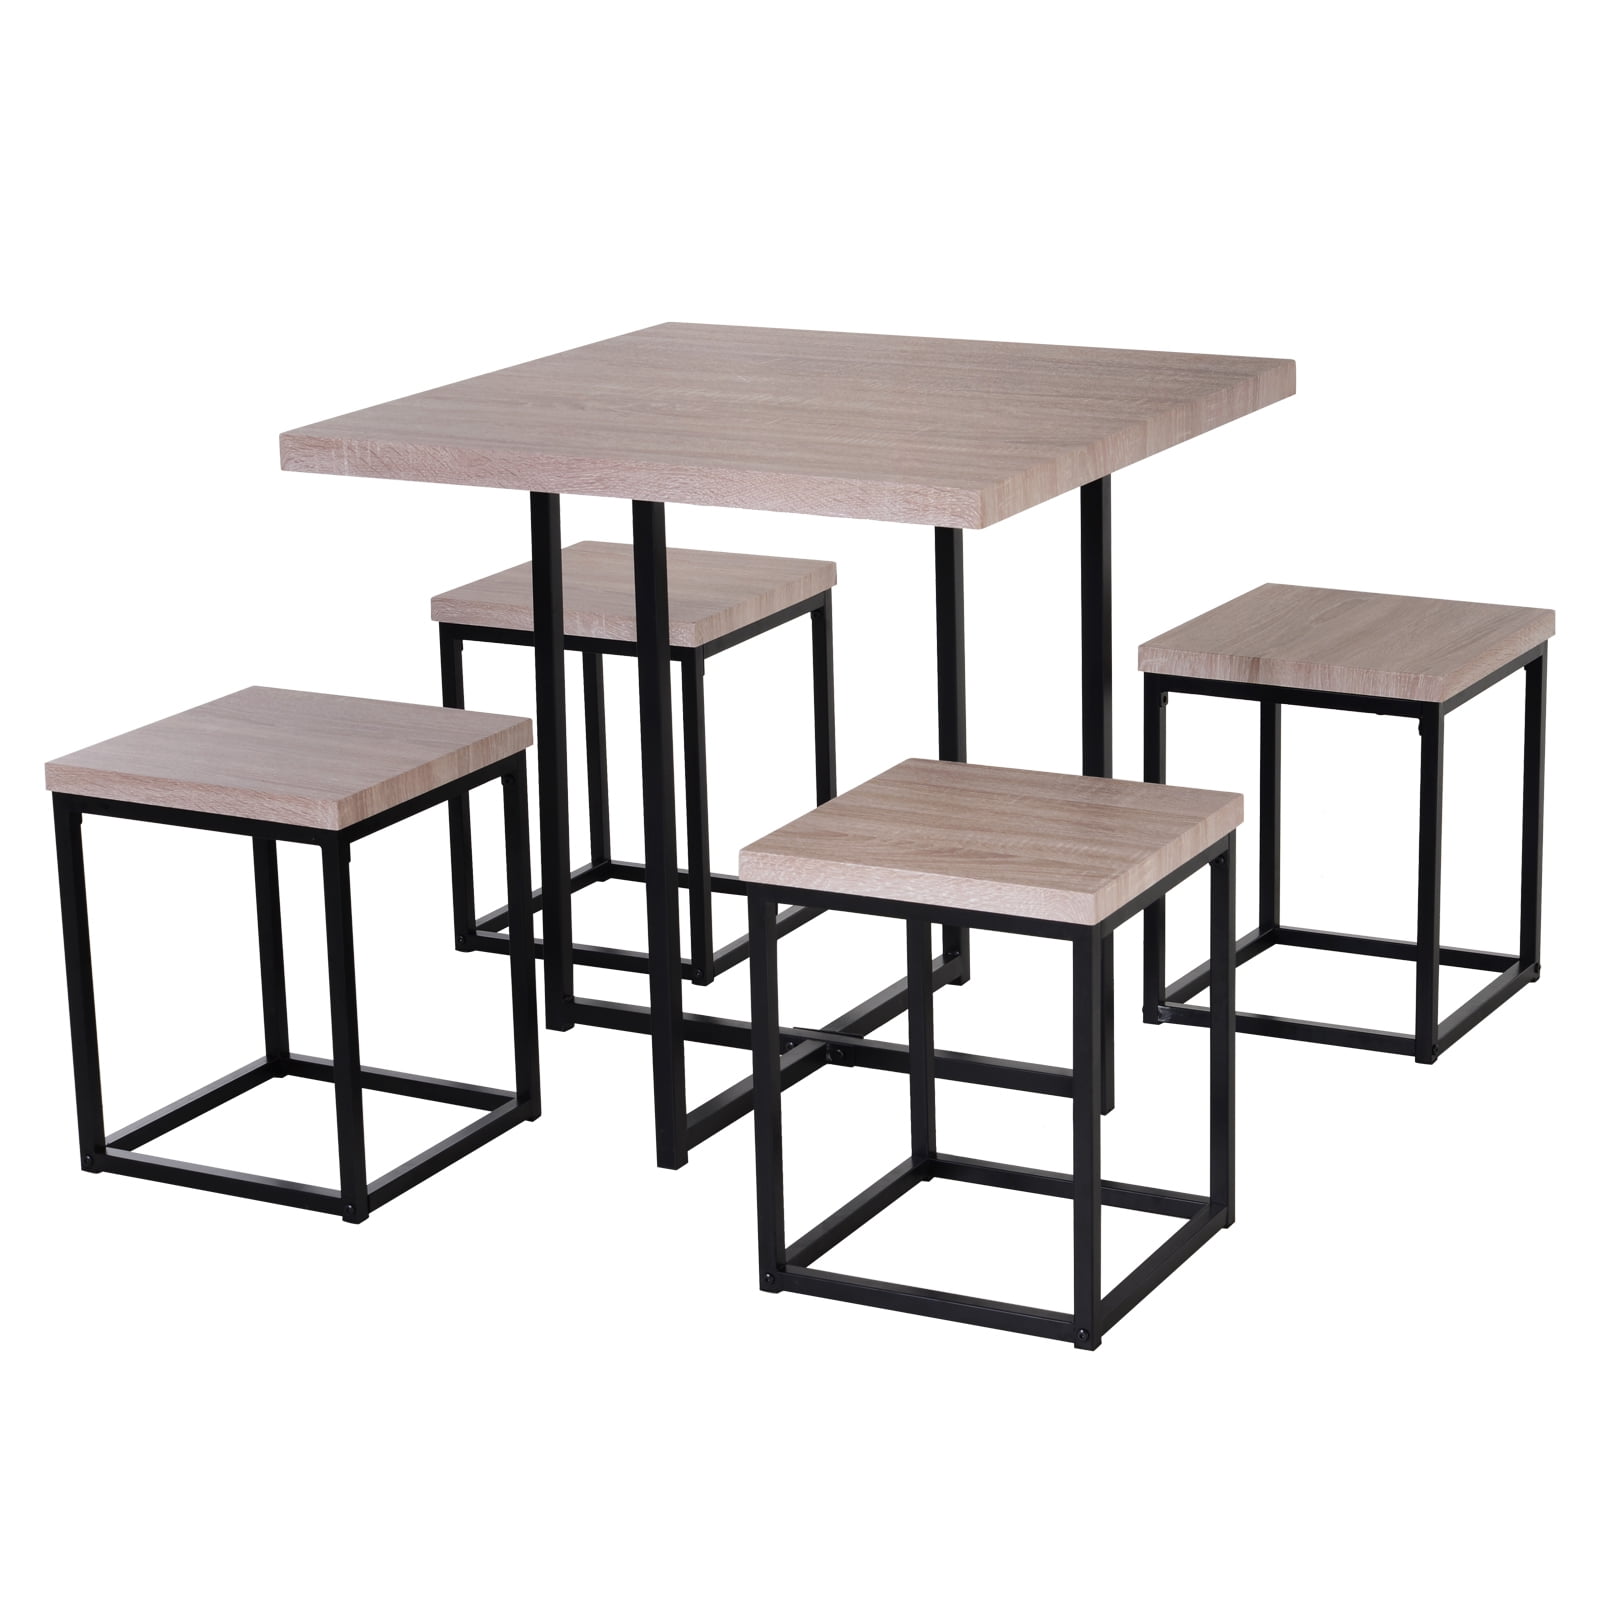 HOMCOM 5 Pieces Compact Wooden Dining Set Table Chairs Kitchen Bar Home Furniture 